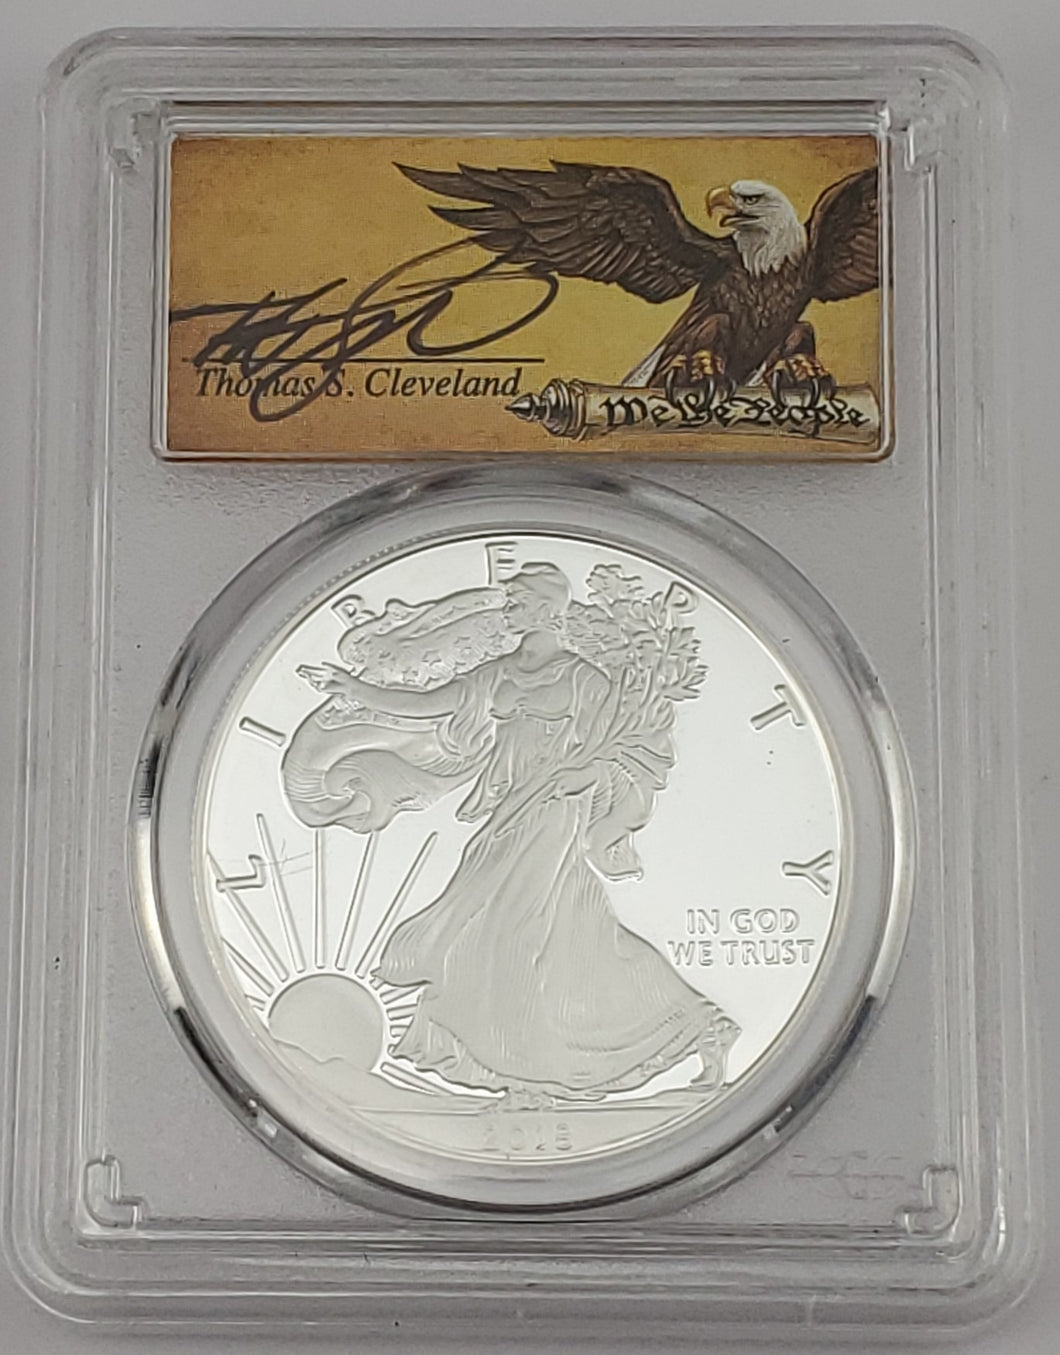 2018 S American Silver Eagle $1 First Day Of Issue PCGS PR 70 DCAM